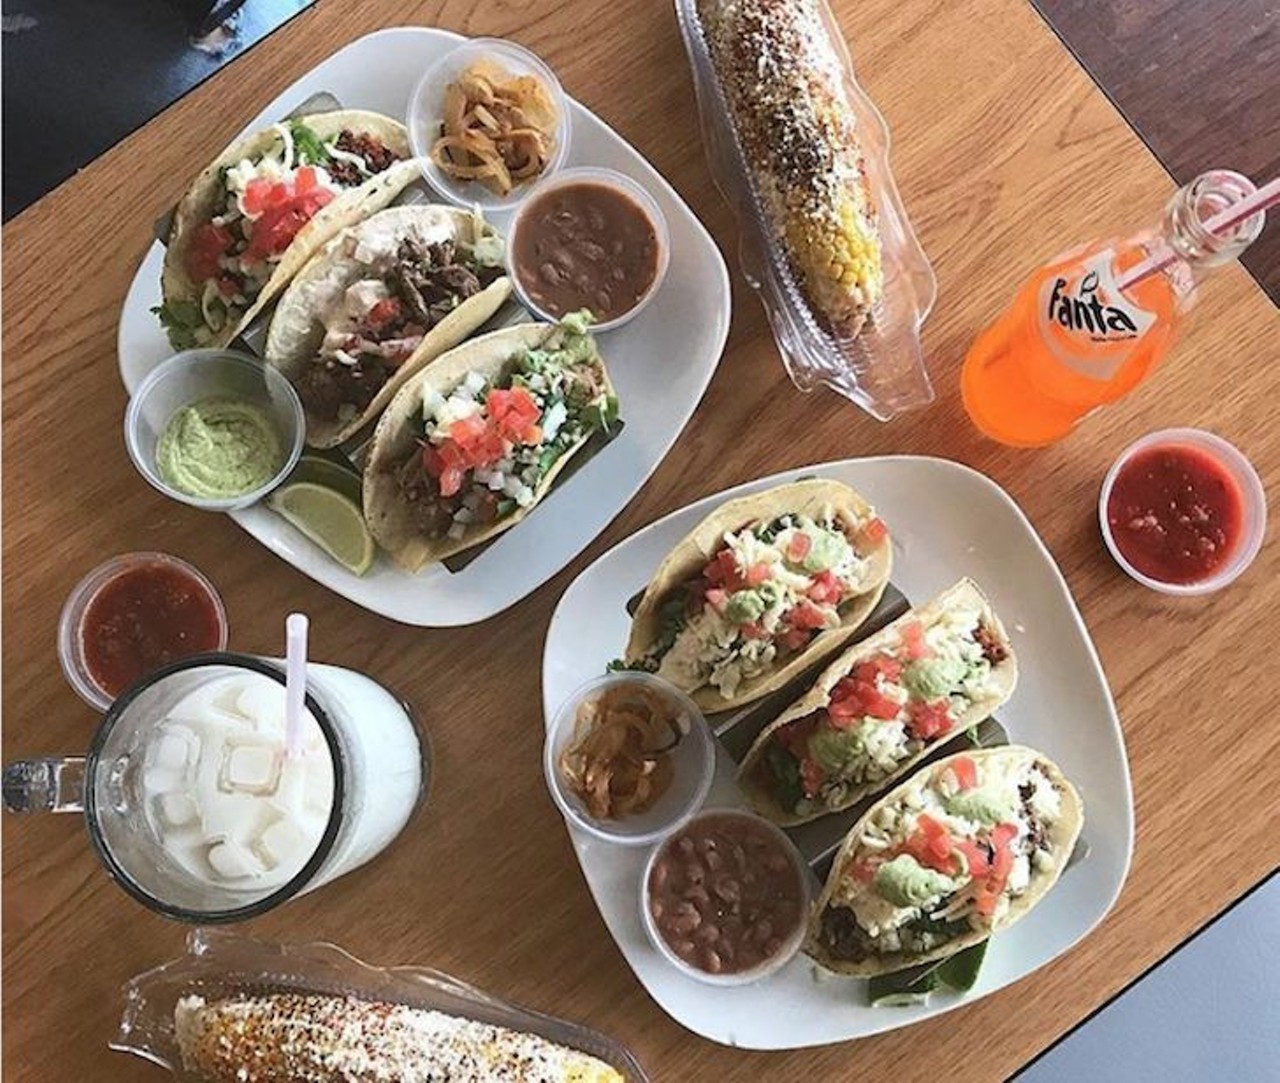 Taqueria El Gordo
830 Laura St., Casselberry, 321-295-7351
This family-run establishment serves up tasty elote, authentic mole and fresh tacos ranging from $.99 to $2.95. Balance out the savory bites with arroz con dulce or lime custard for dessert.
Photo via orlandoeats/Instagram